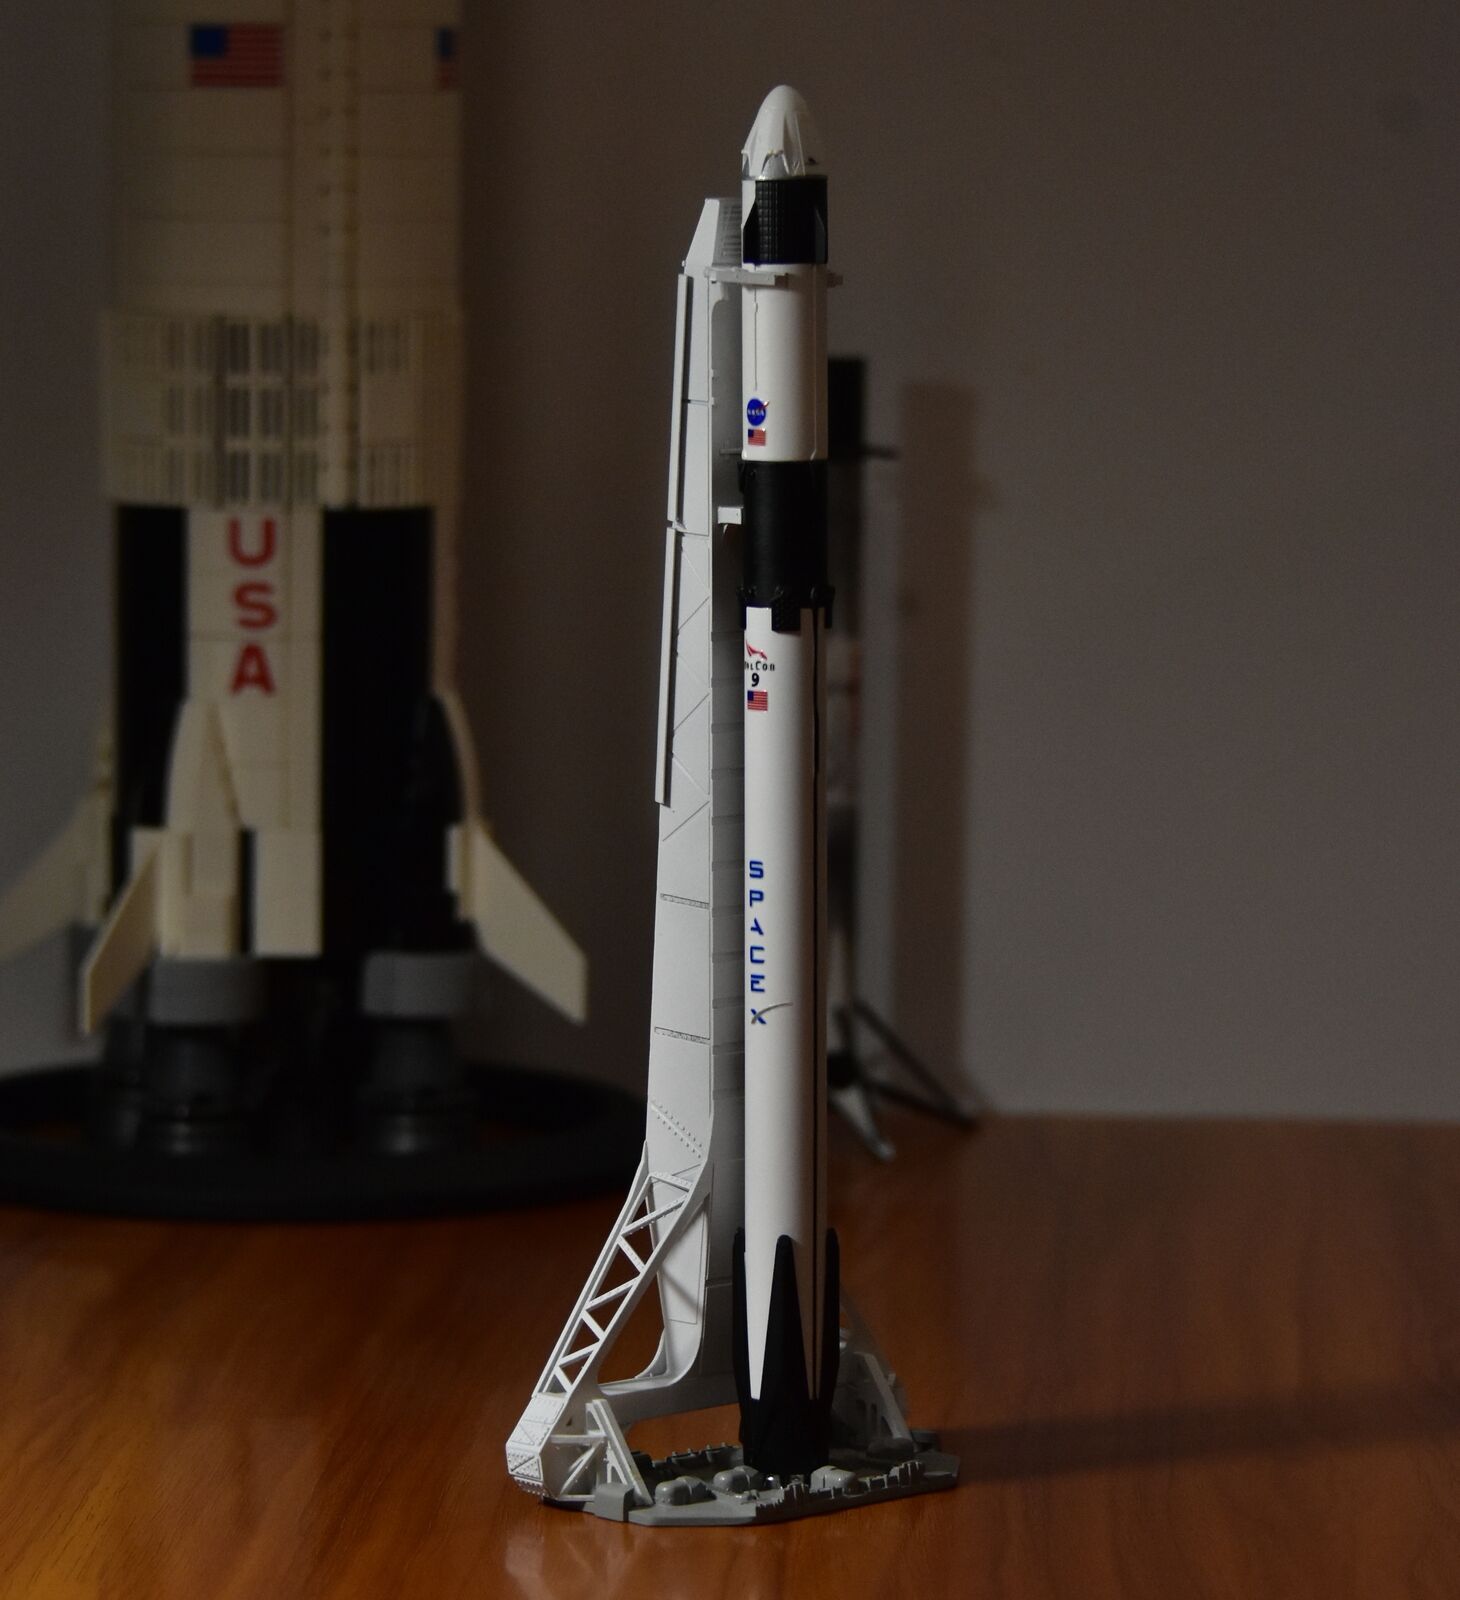 SpaceX Falcon 9 Rocket F9 Model with Tower